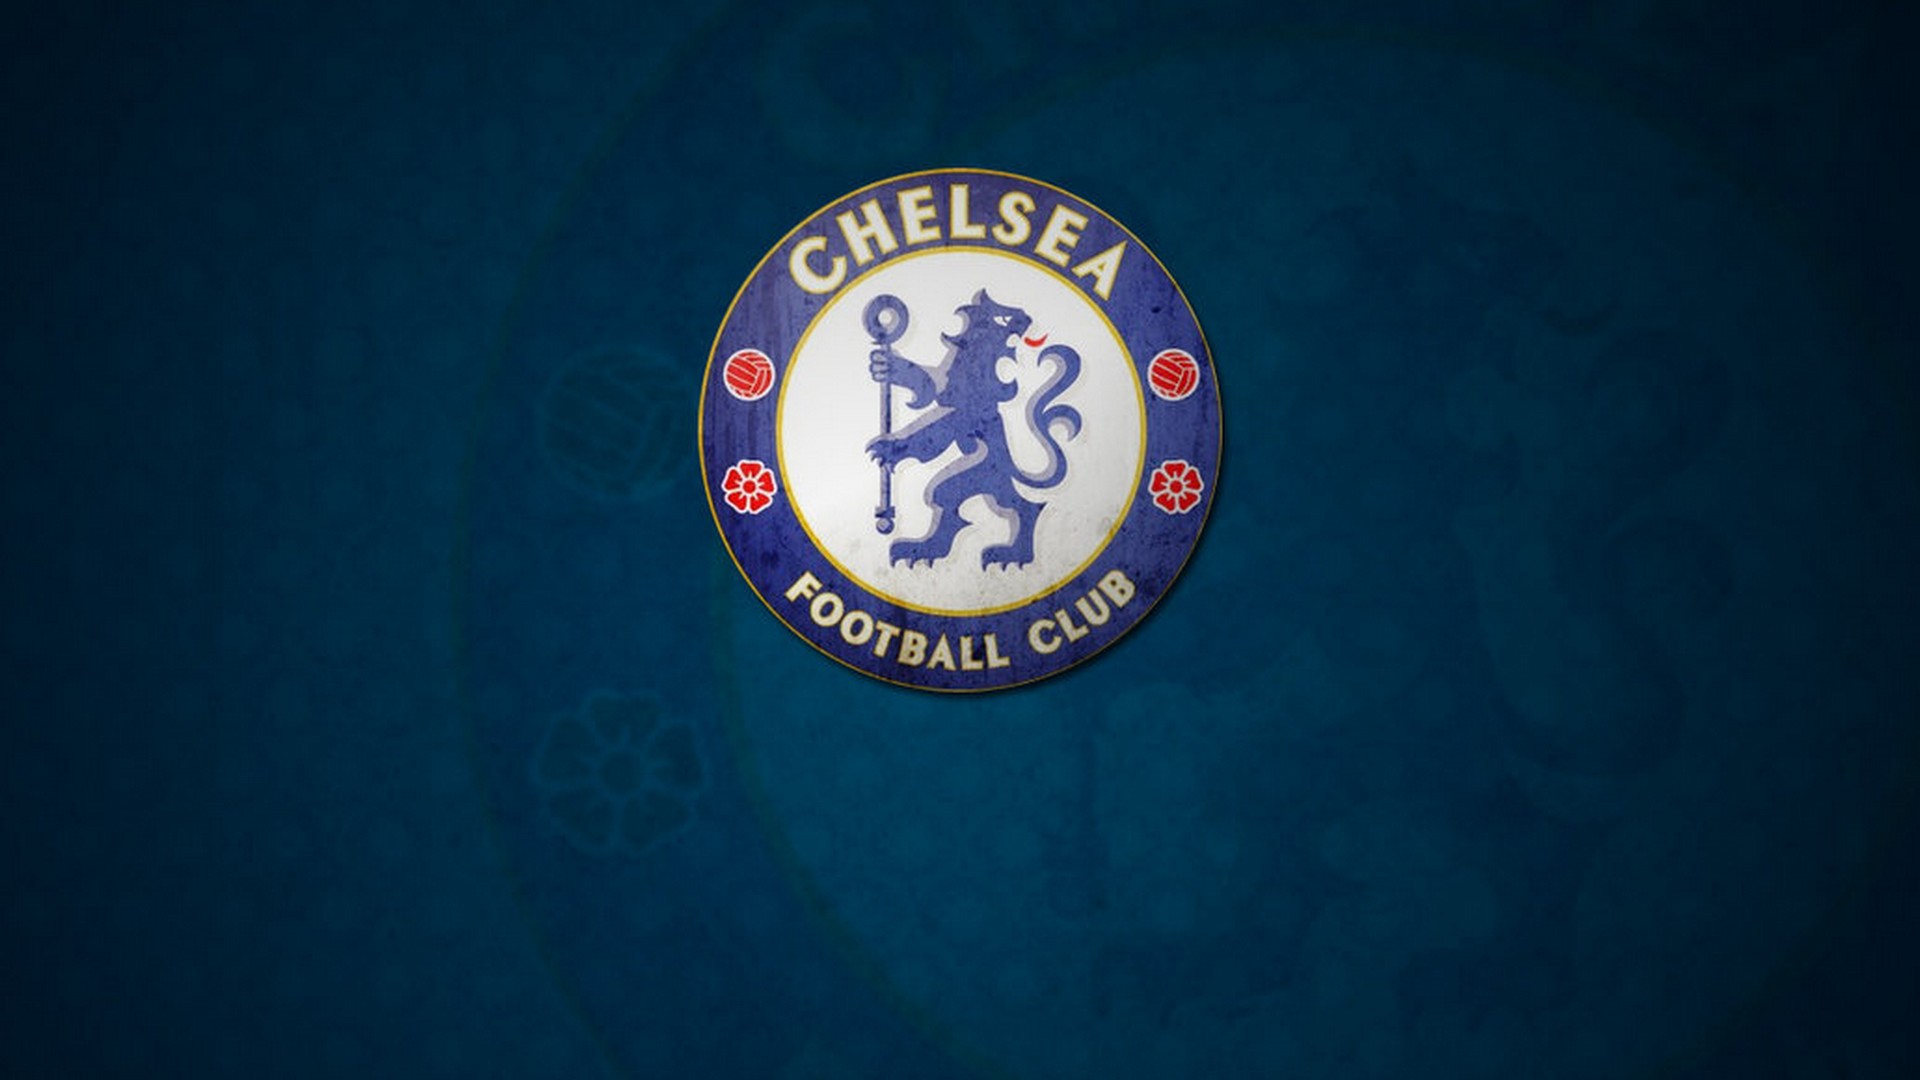 Chelsea Logo For PC Wallpaper with high-resolution 1920x1080 pixel. You can use this wallpaper for your Desktop Computers, Mac Screensavers, Windows Backgrounds, iPhone Wallpapers, Tablet or Android Lock screen and another Mobile device